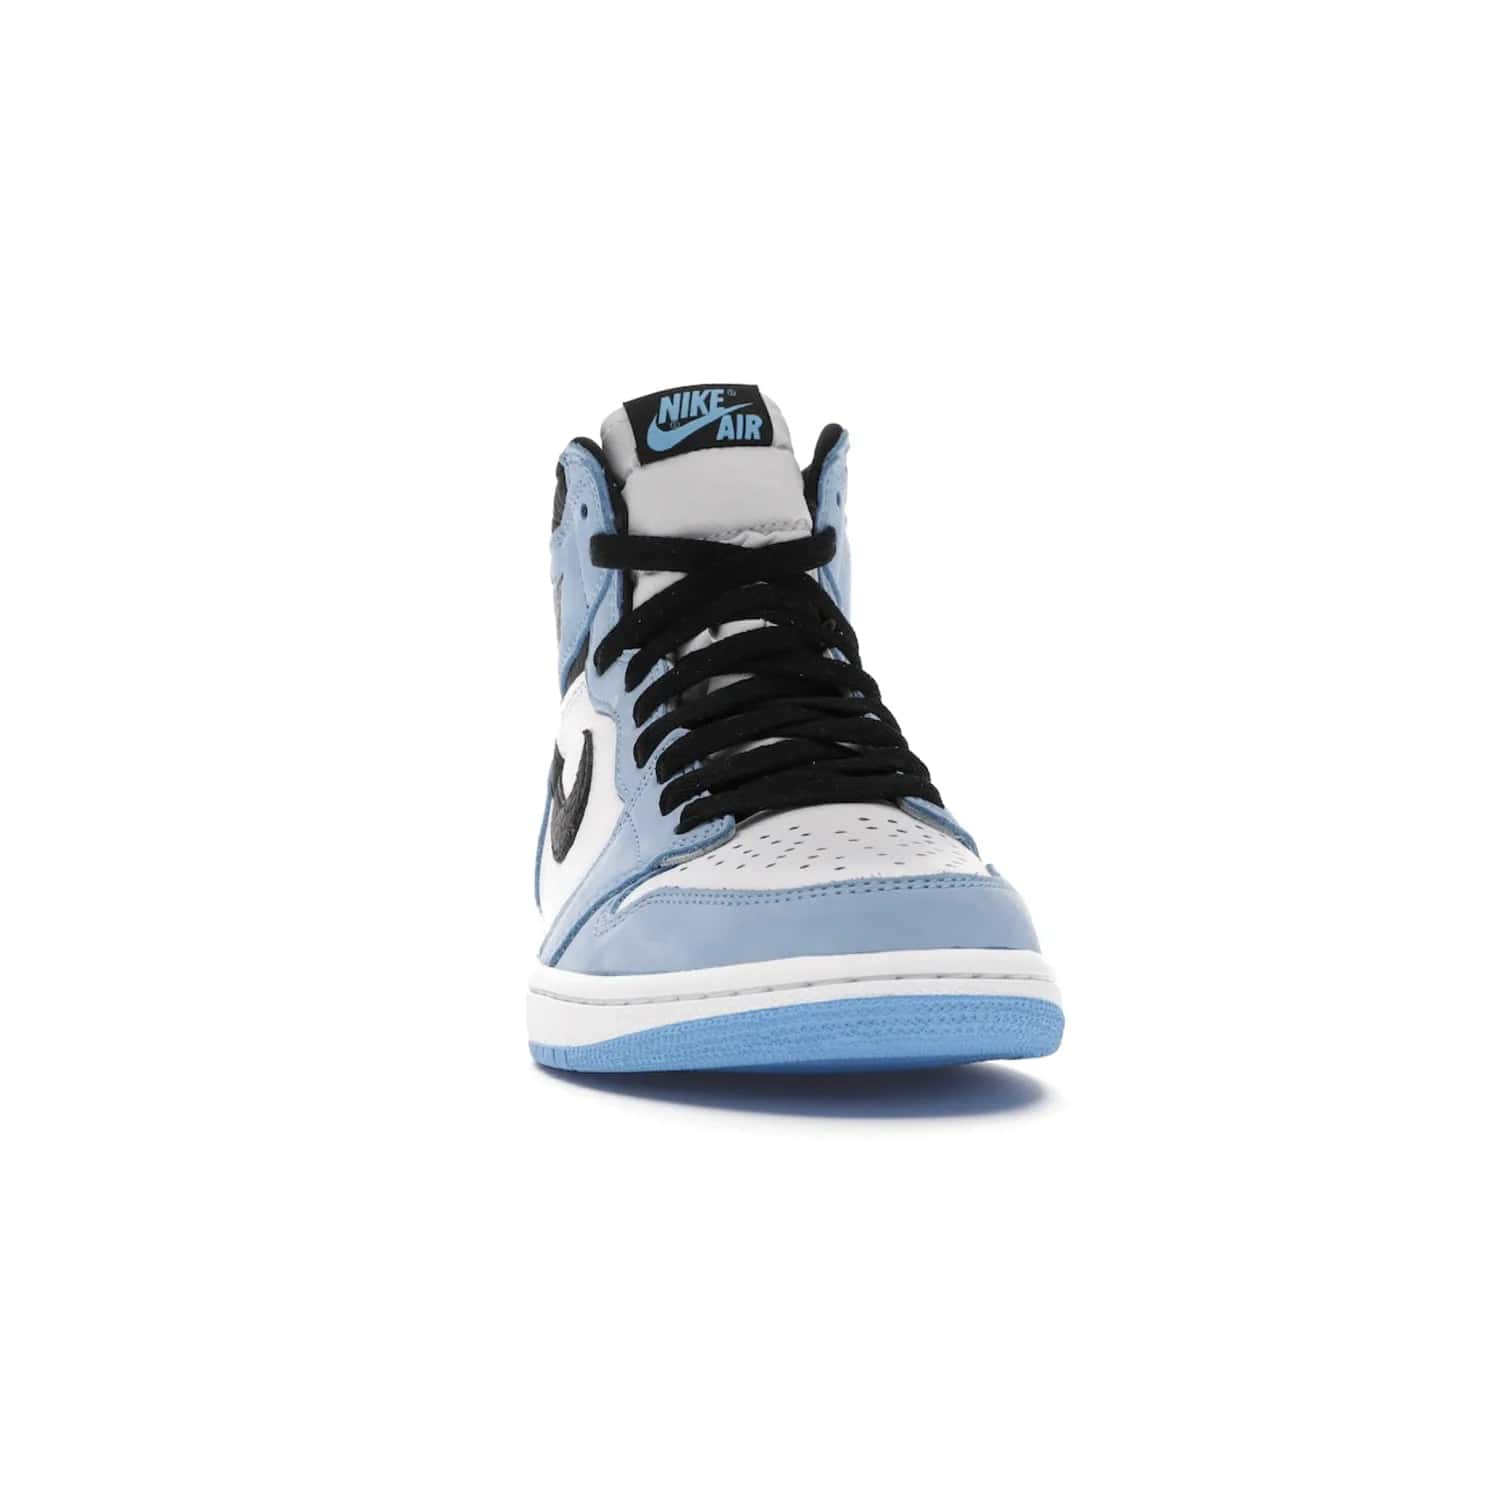 Jordan 1 Retro High White University Blue Black - Image 9 - Only at www.BallersClubKickz.com - Shop the Air Jordan 1 Retro High University Blue. White and black tumbled leather upper with University Blue Durabuck overlays, Nike Air woven label, Air Jordan Wings Logo, white midsole and University Blue outsole. Available March 2021.